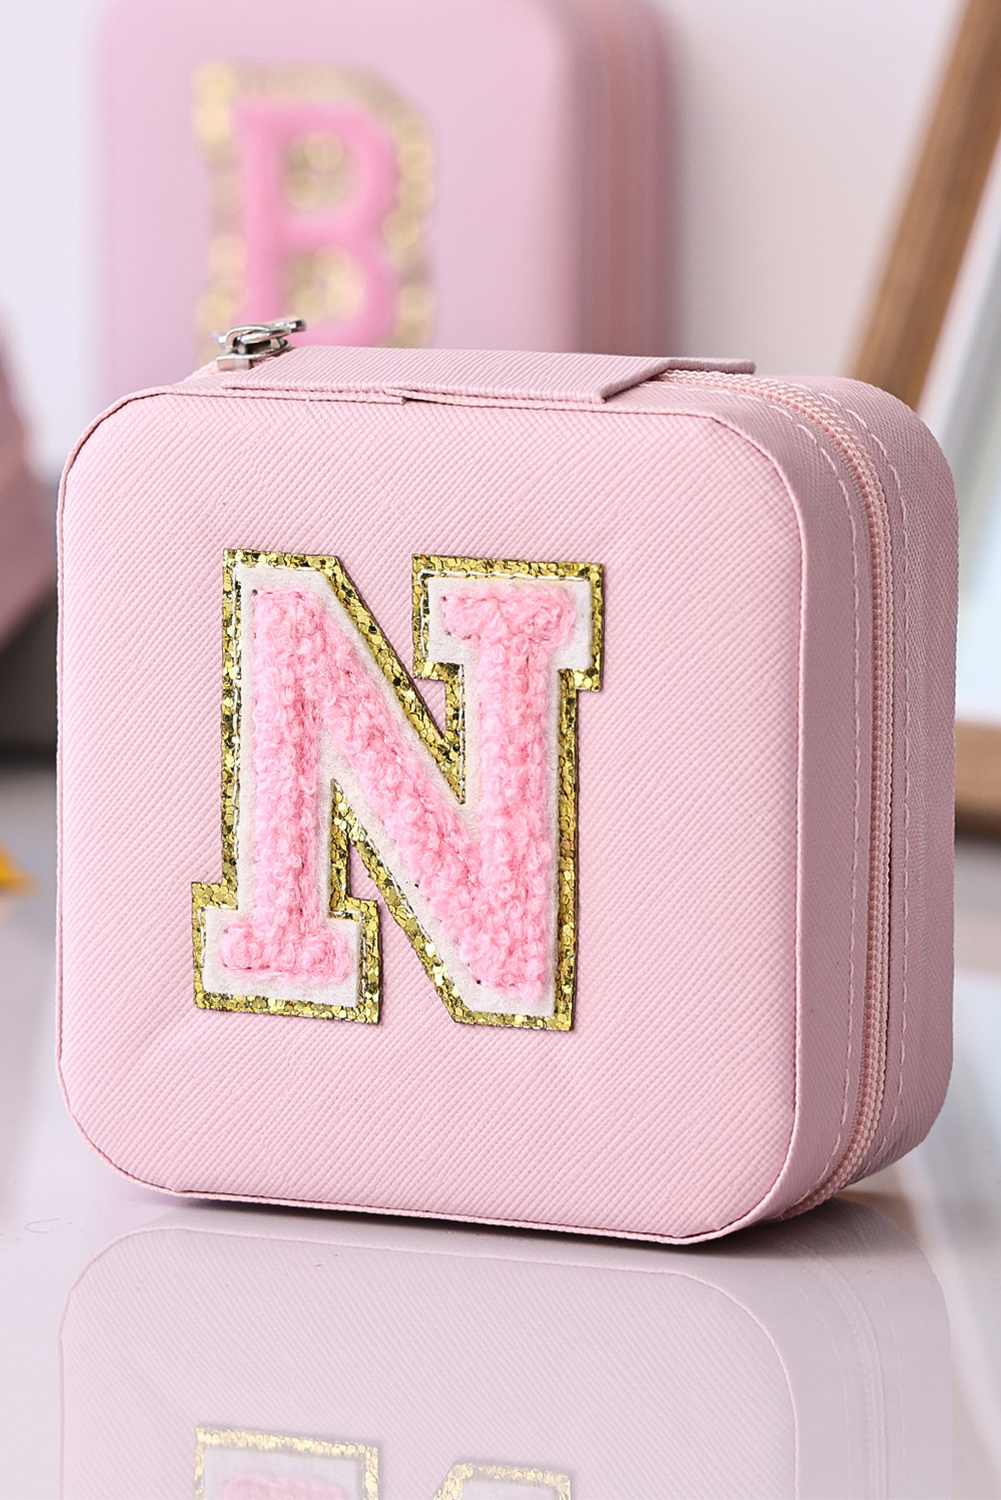 Shewin Wholesale Distributor Pink Initial N Chenille Square JEWELRY Box